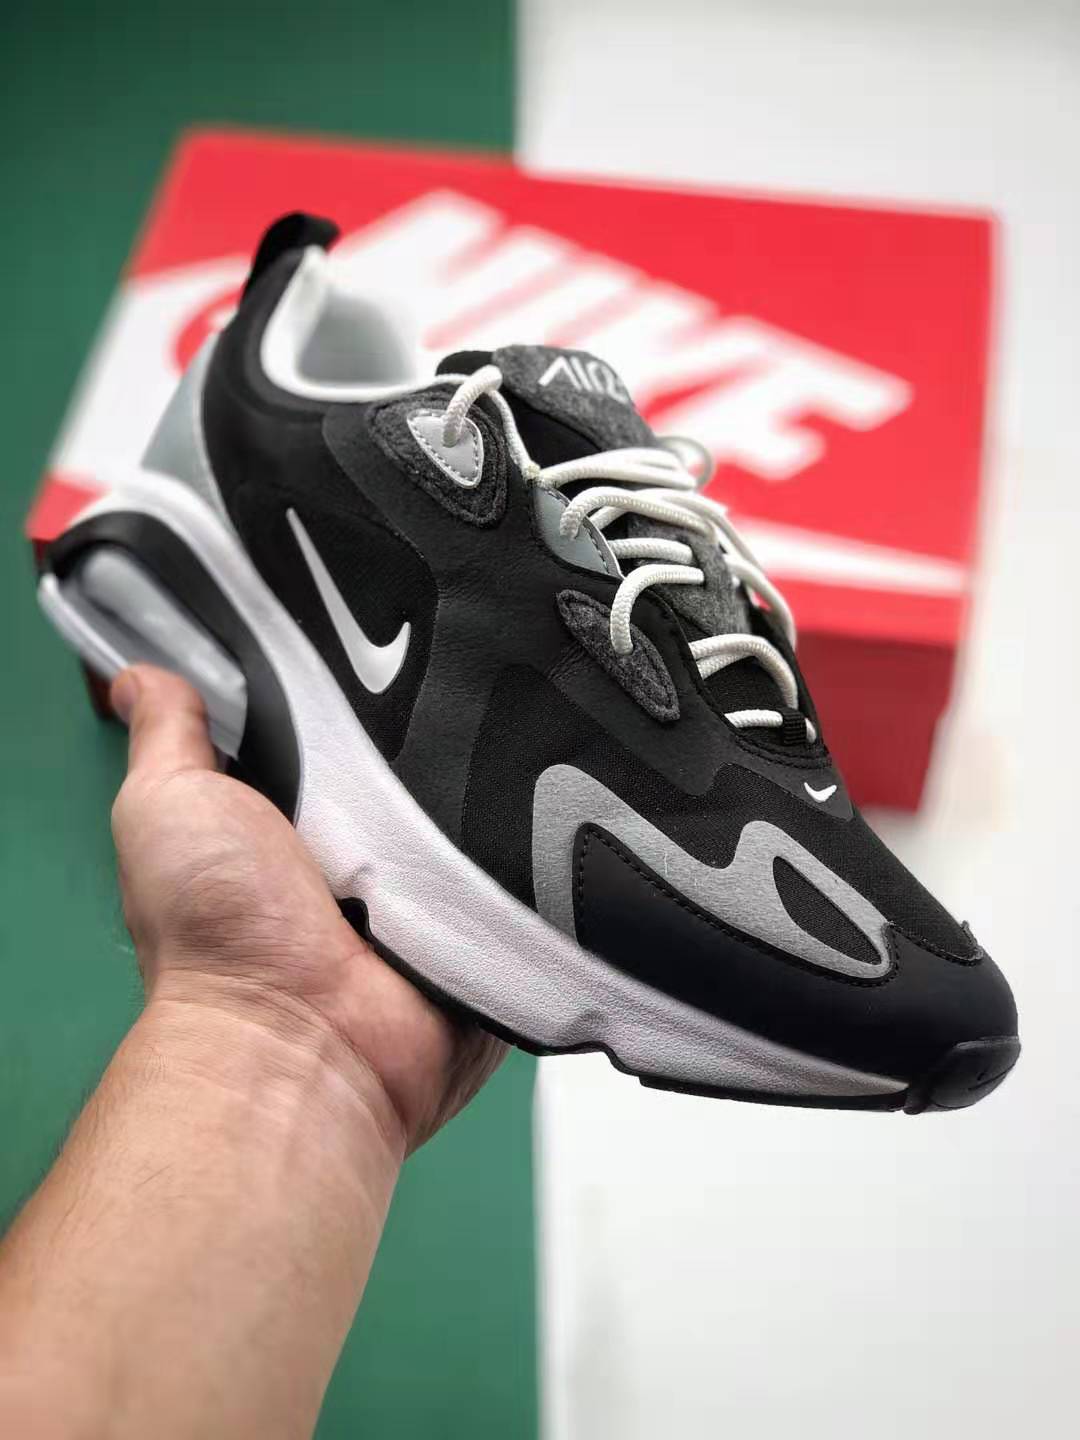 Nike Air Max 200 'Black' CQ4599-010 - Latest Release from Nike Air Max Collection